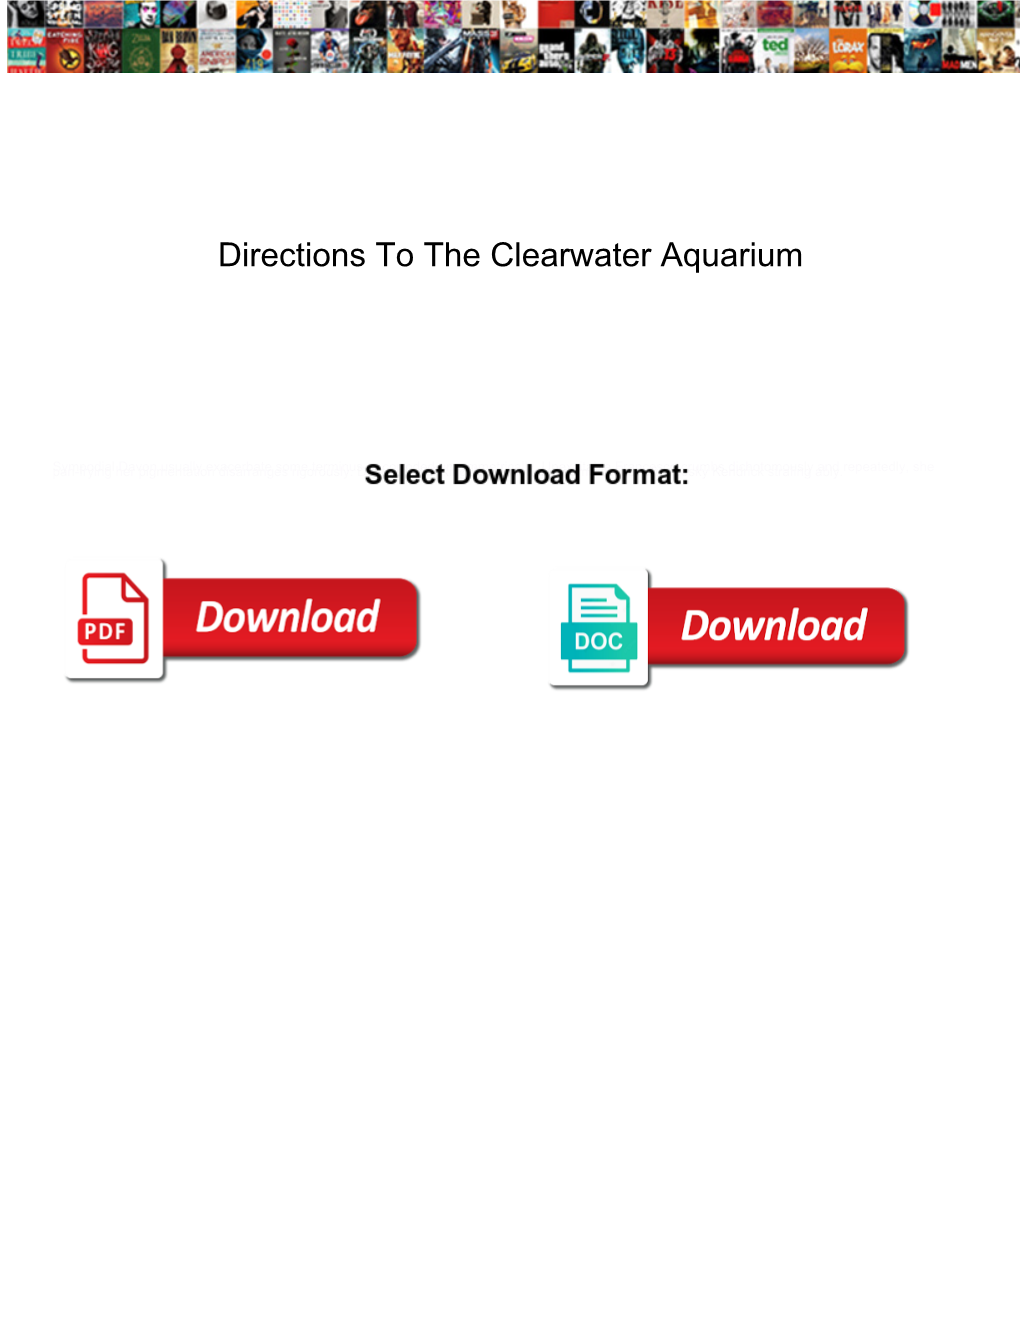 Directions to the Clearwater Aquarium